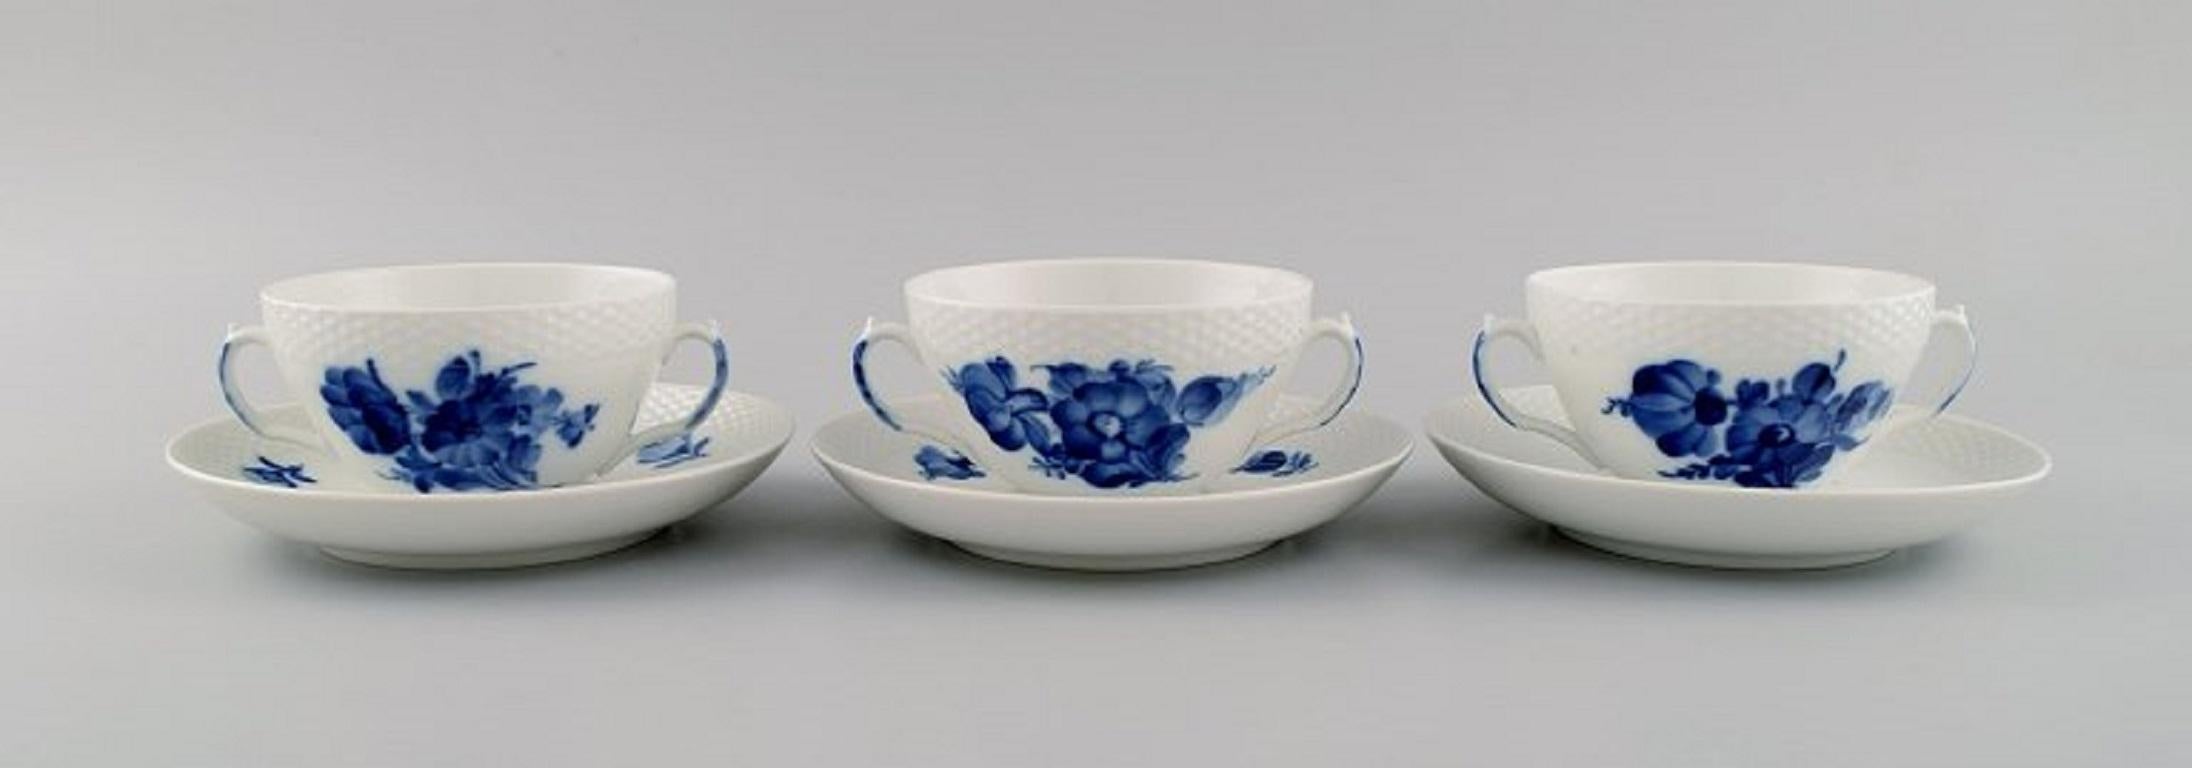 Six Royal Copenhagen Blue Flower Braided bouillon cups with saucers. Model number 10/8282.
The cup measures: 10.5 x 6 cm.
Saucer diameter: 16 cm.
In excellent condition.
Stamped.
1st factory quality.